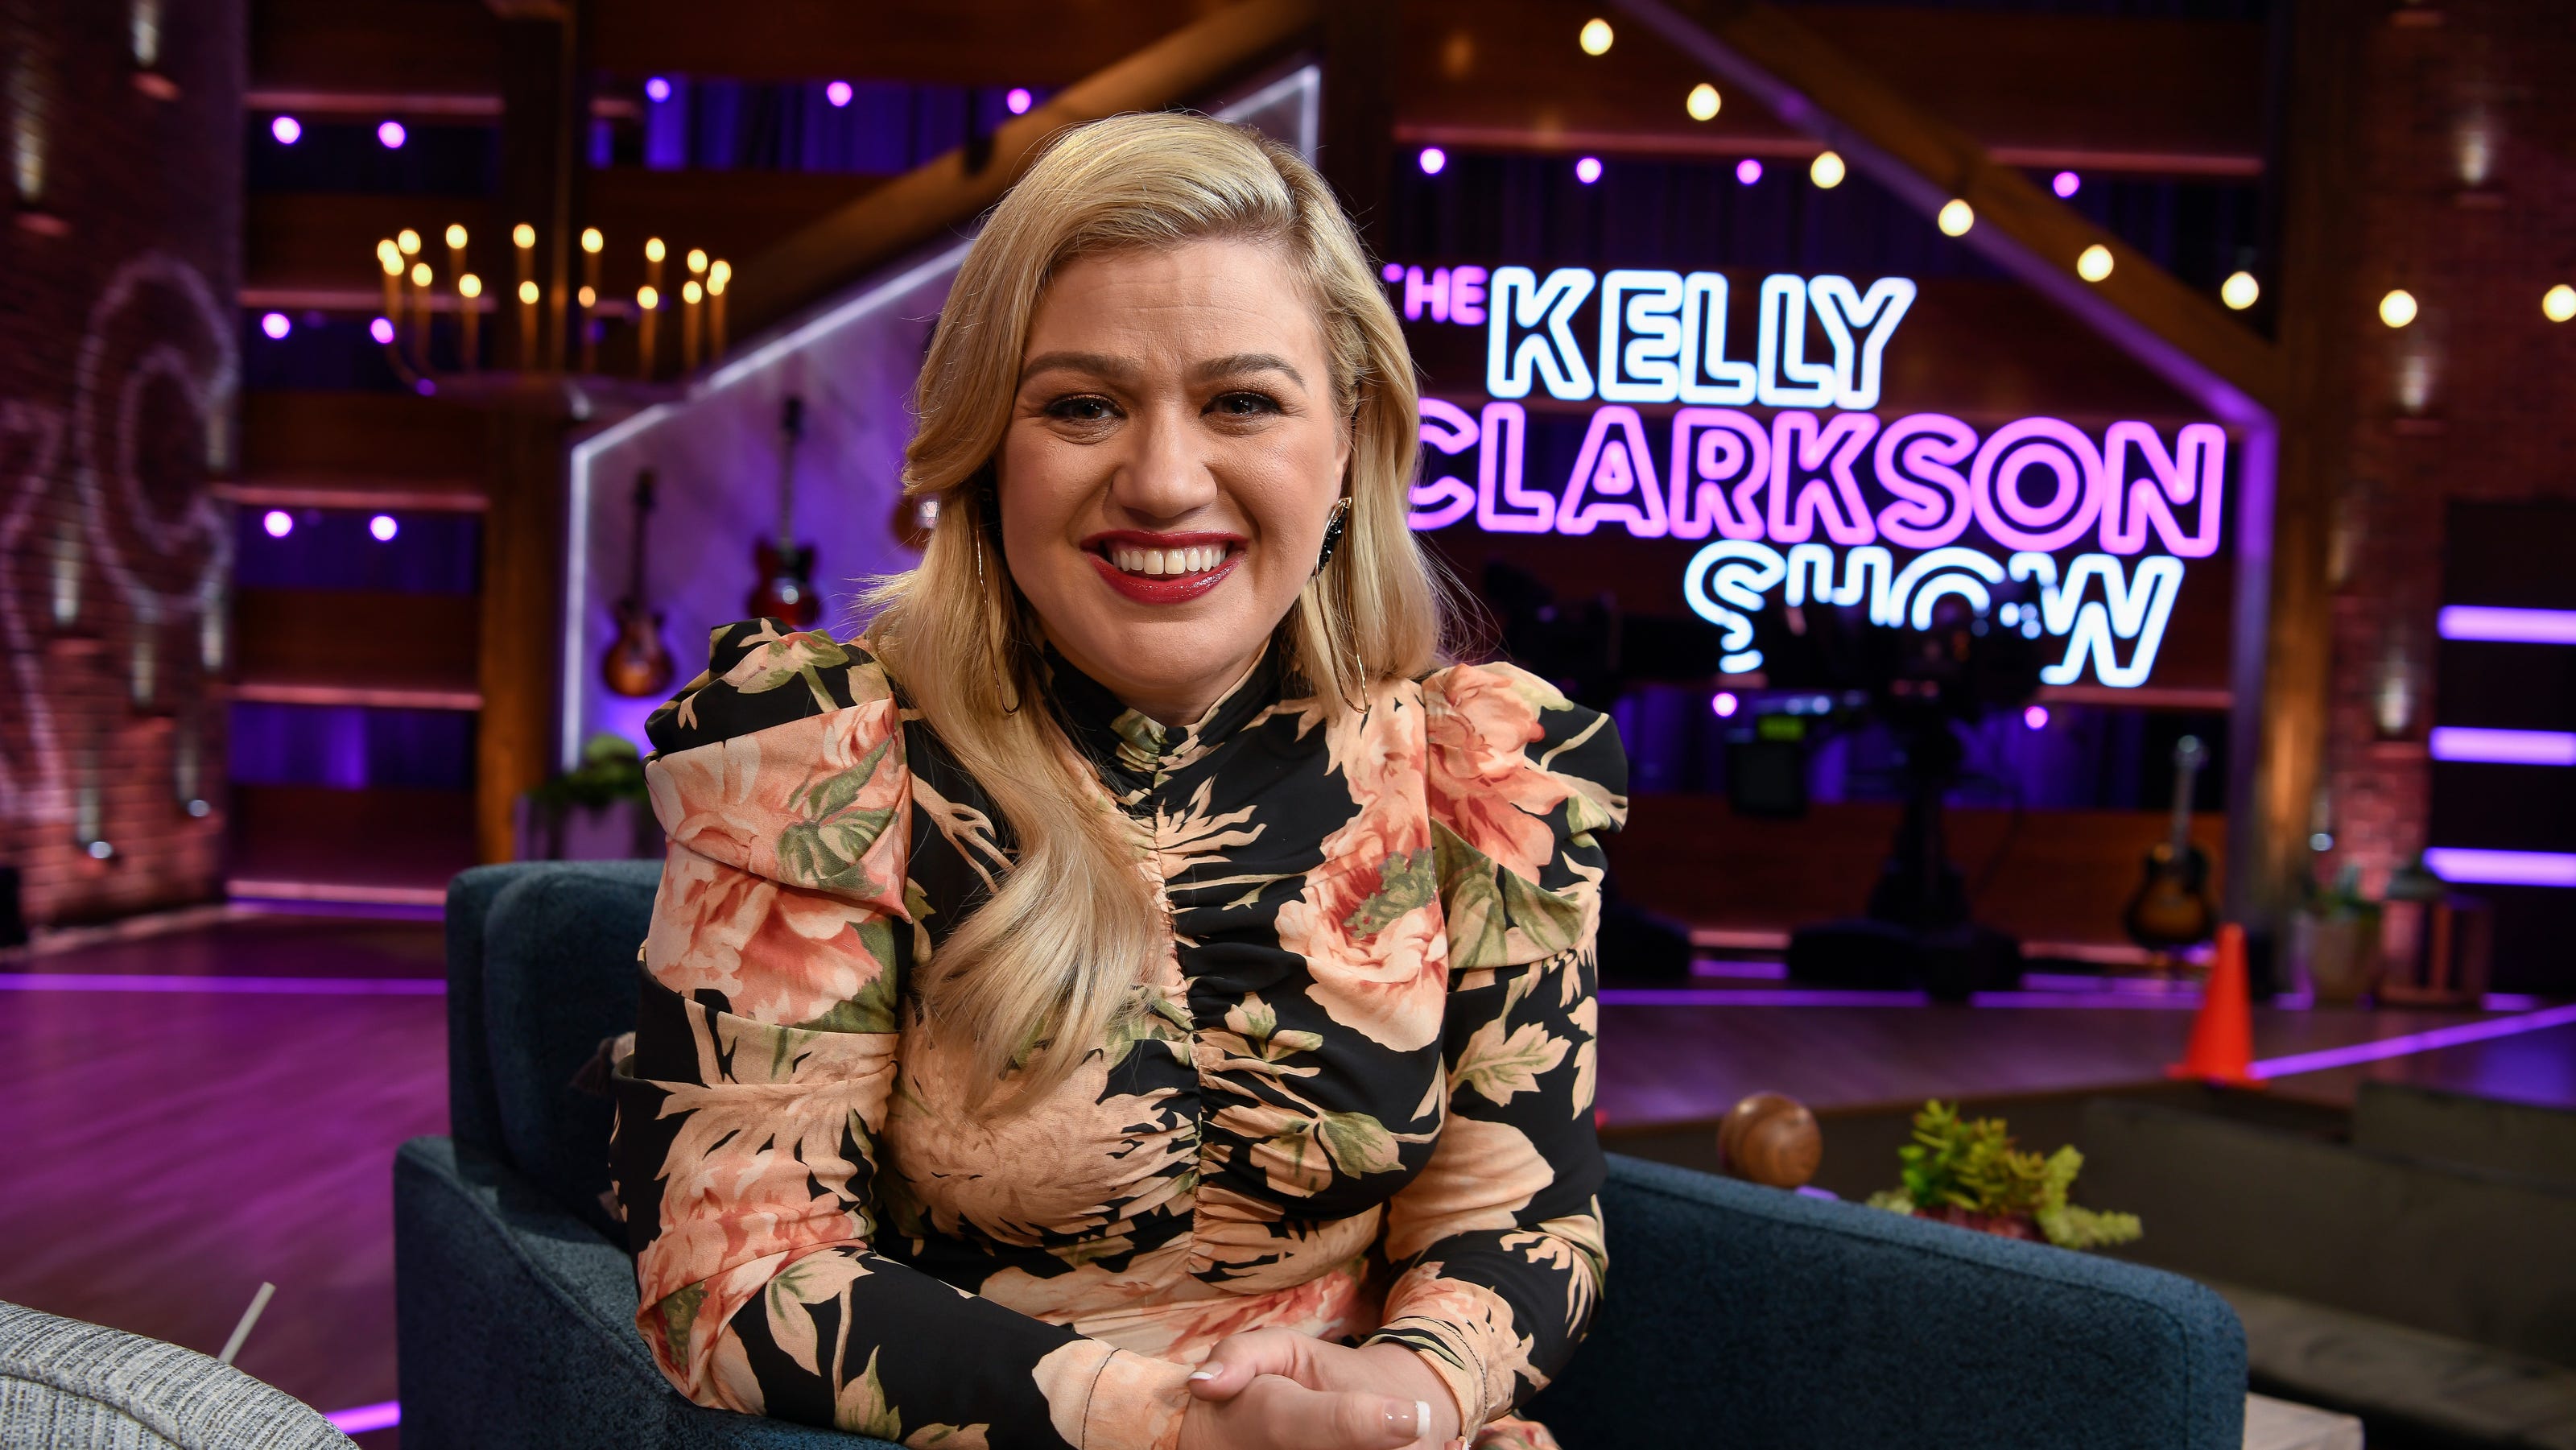 seventeen-to-make-guest-appearance-on-nbc-the-kelly-clarkson-show-on-january-13